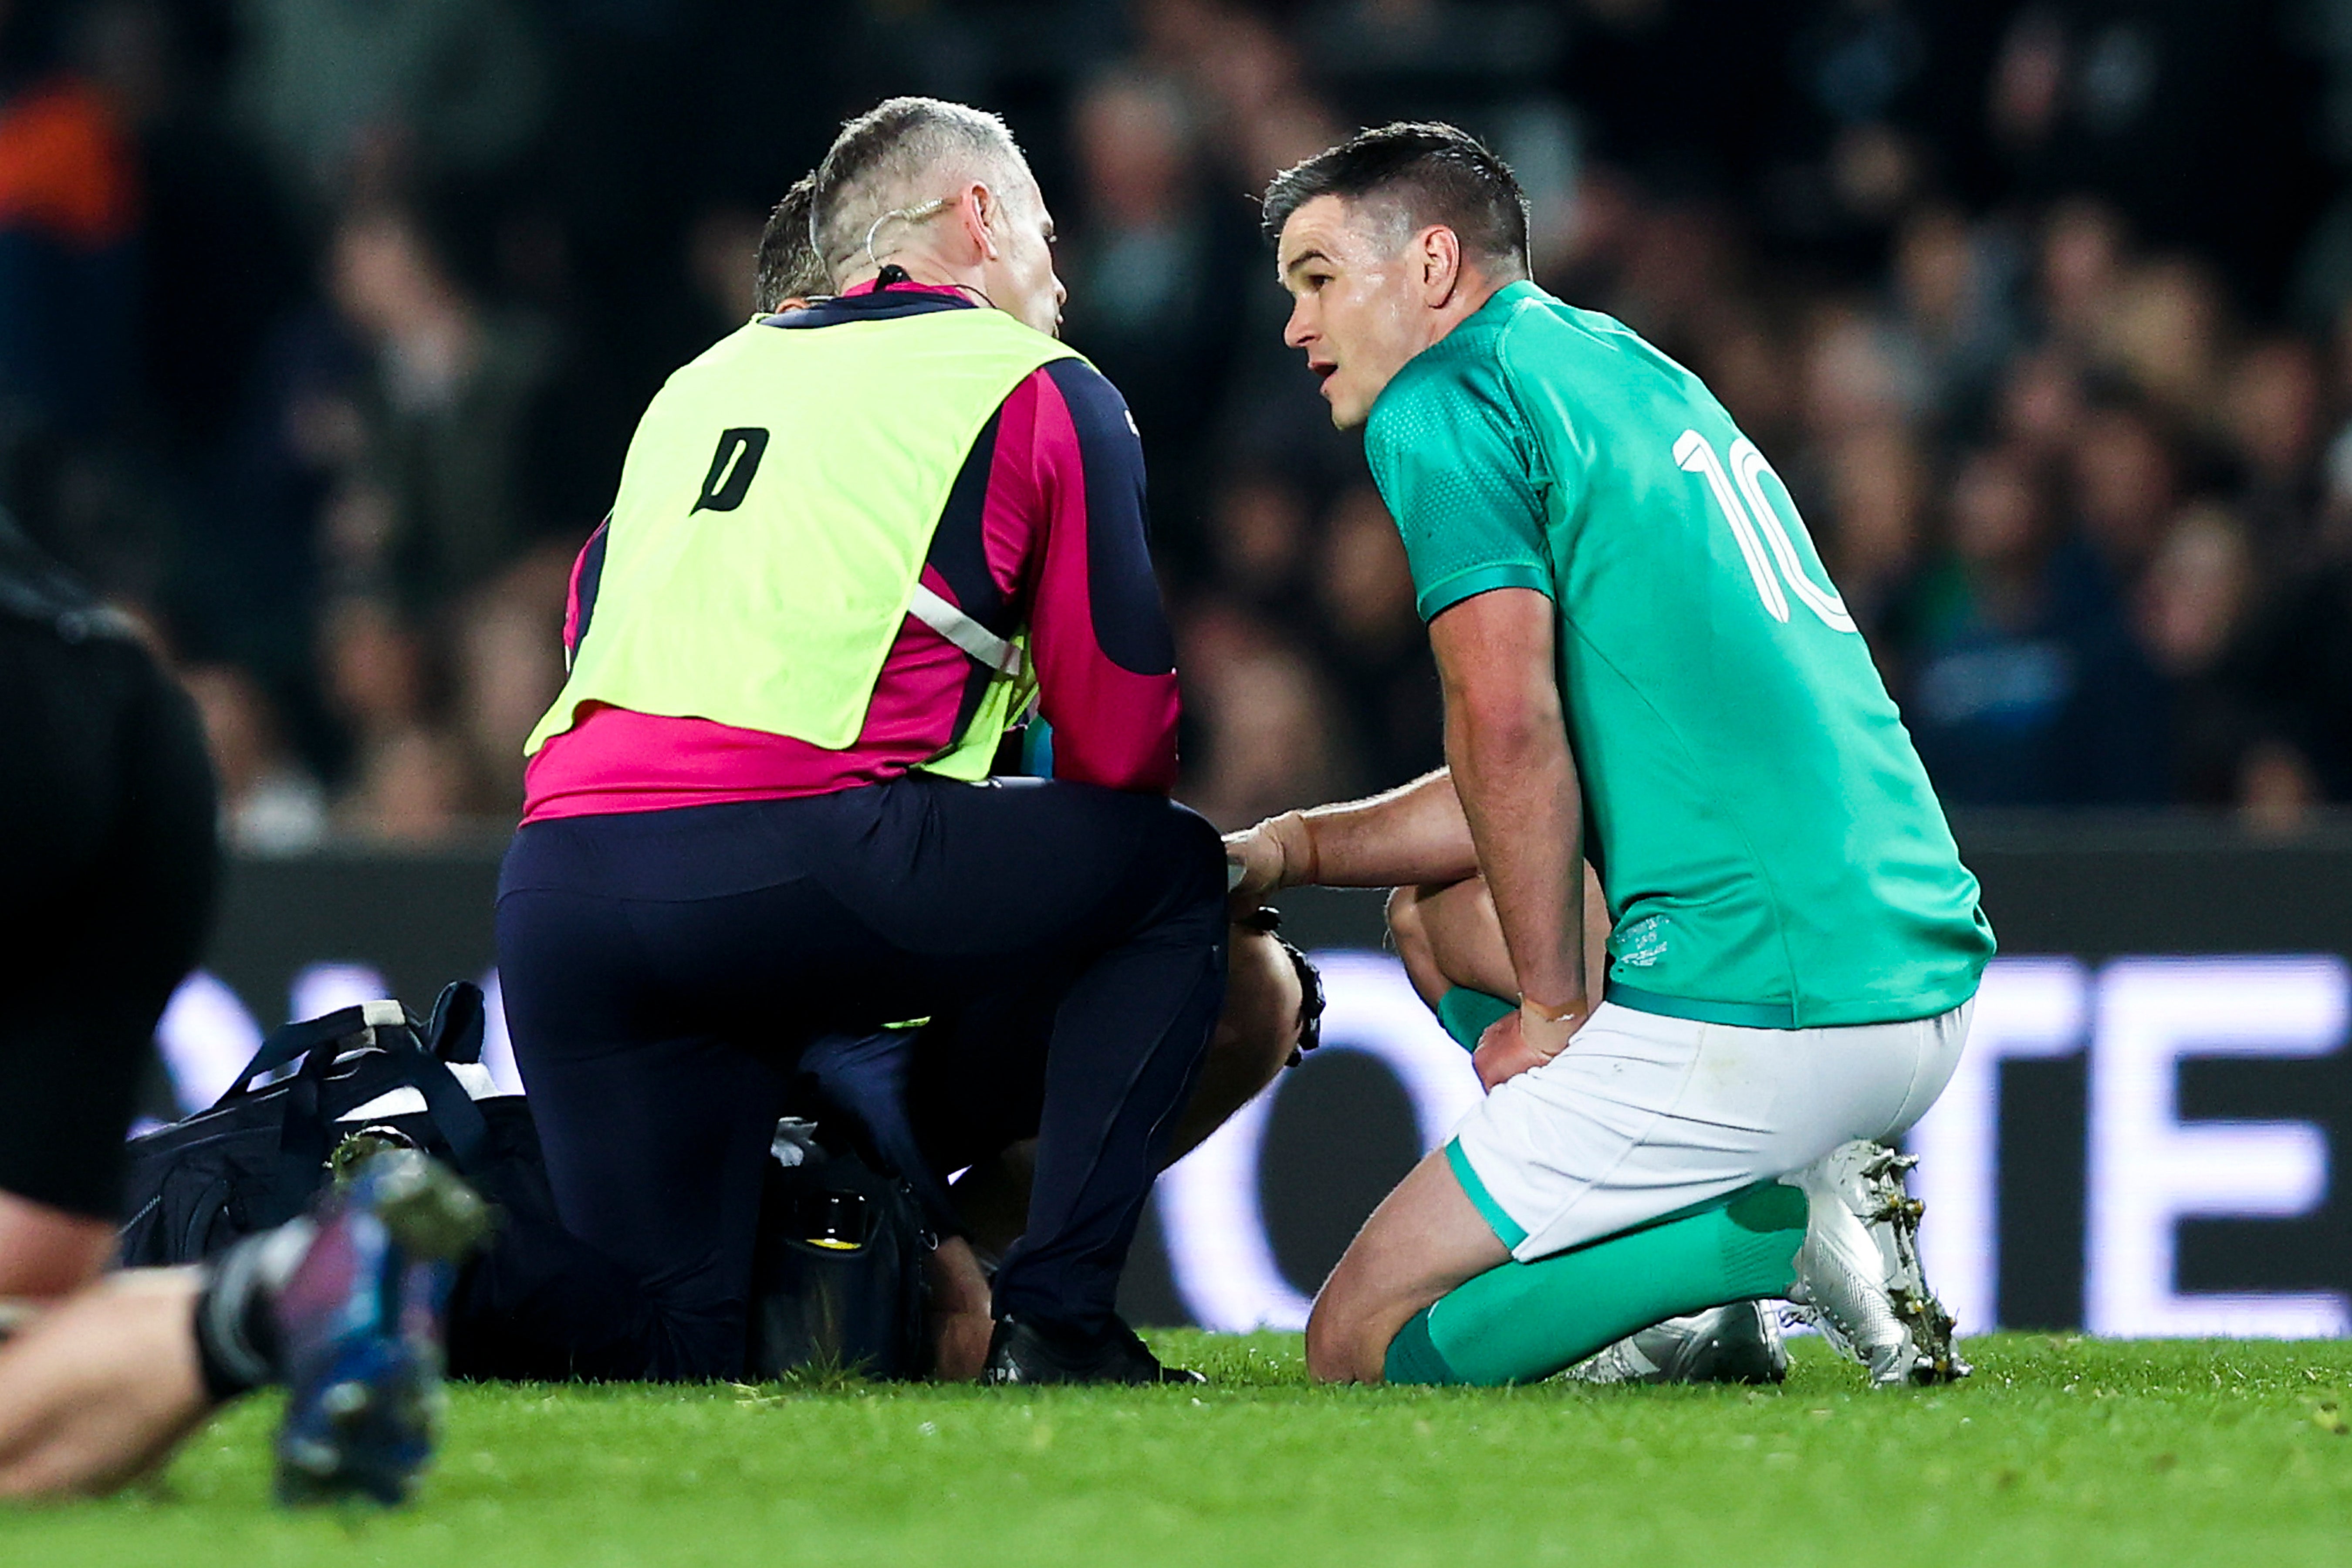 The fly-half was taken off with suspected concussion in the series opener